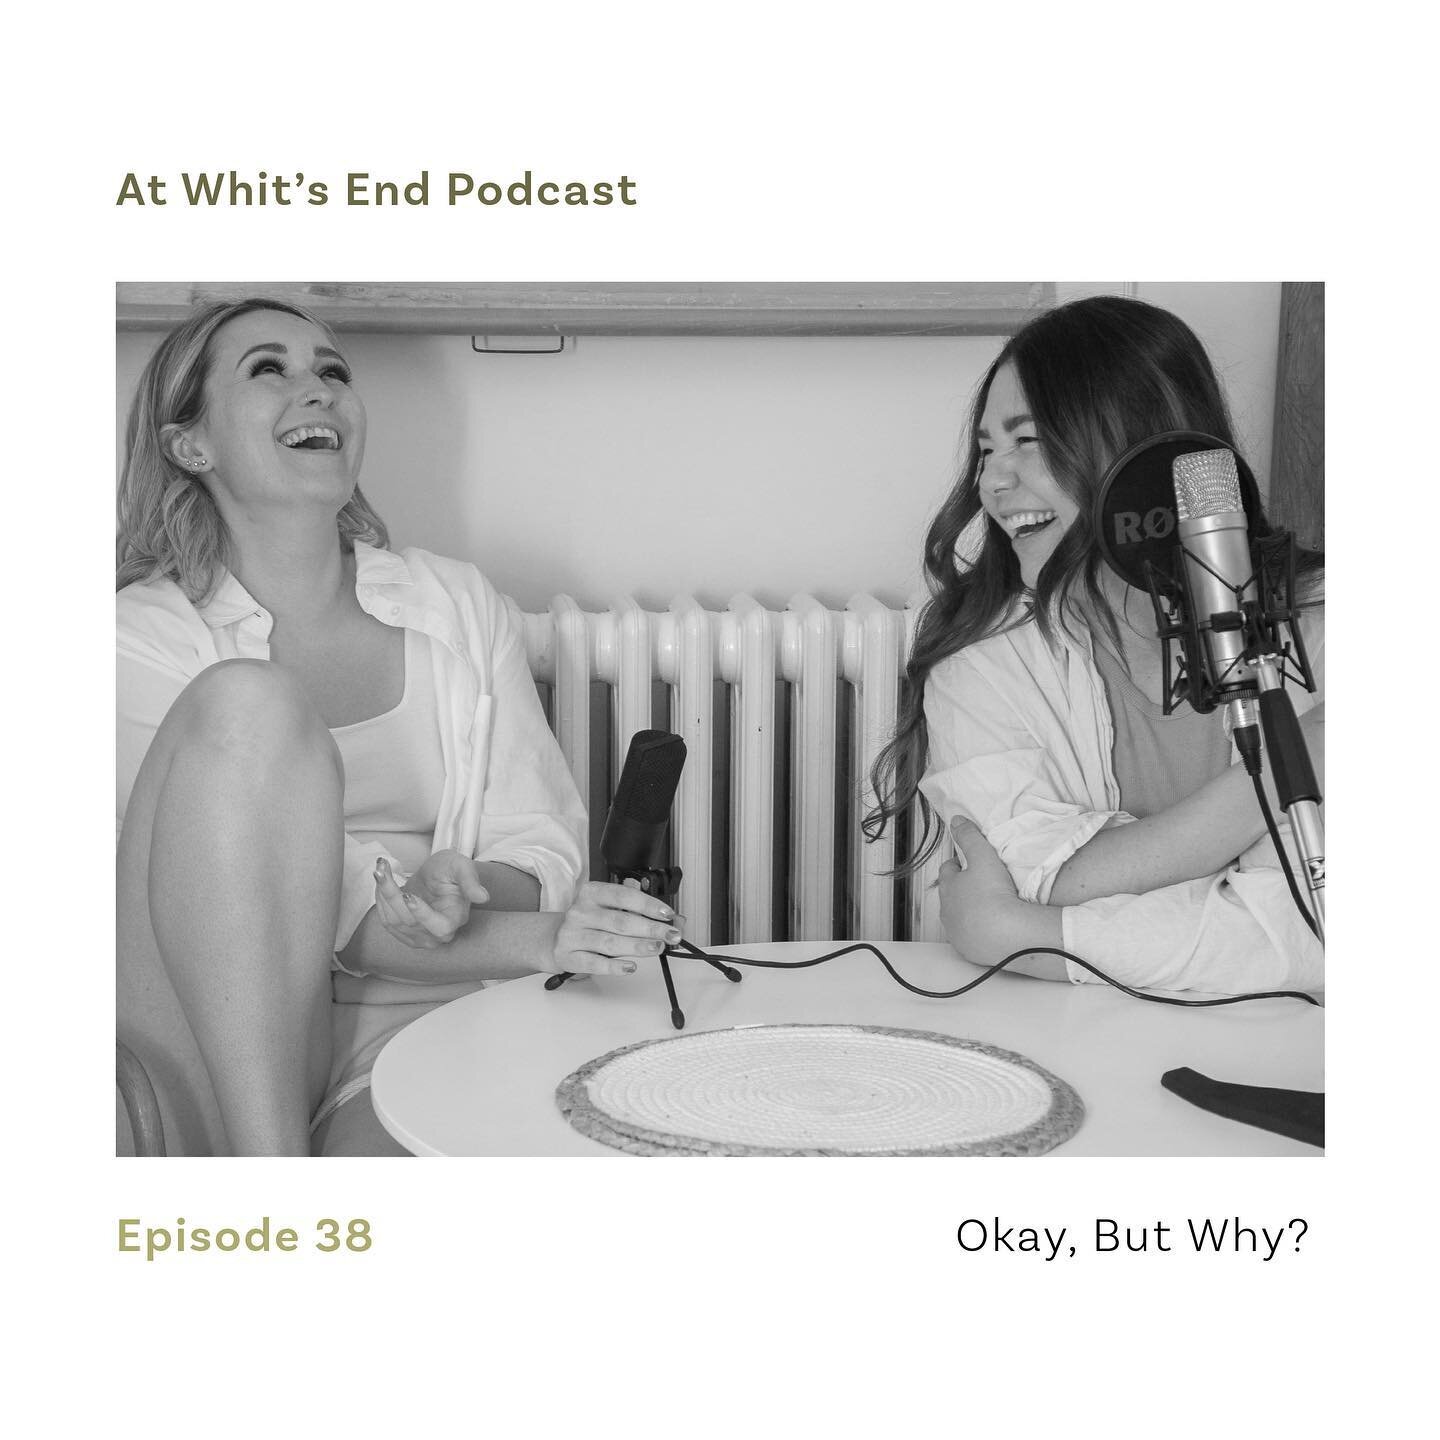 Been a while since I shared a podcast episode on here but this week&rsquo;s one is a good one! @maggsymayco and I are diving into the most burning &ldquo;why&rdquo; questions on our minds from why we all love true crime so much to why salt makes ever